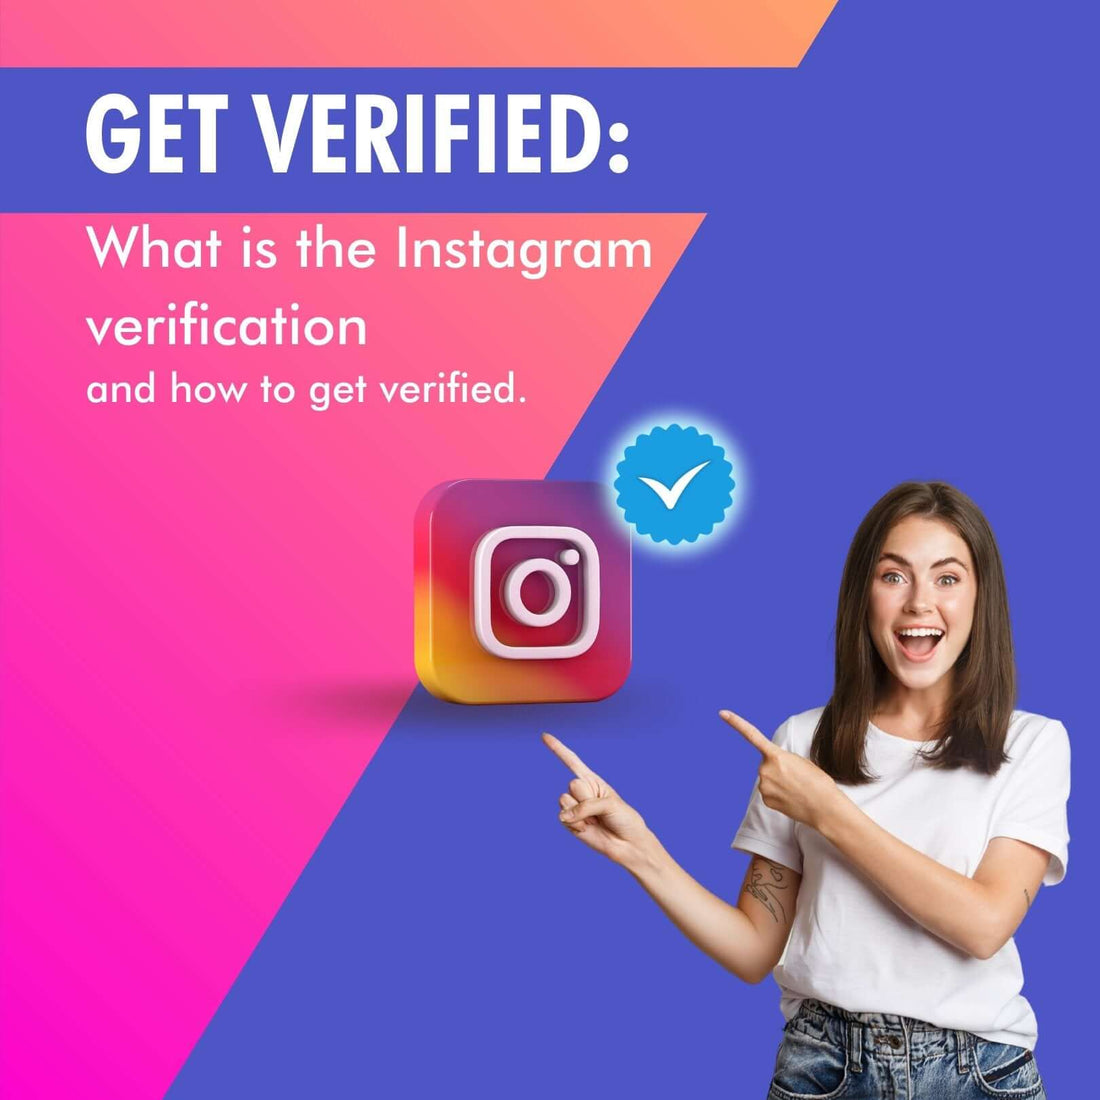 Get Verified: What is the Instagram verification and how to get verified.